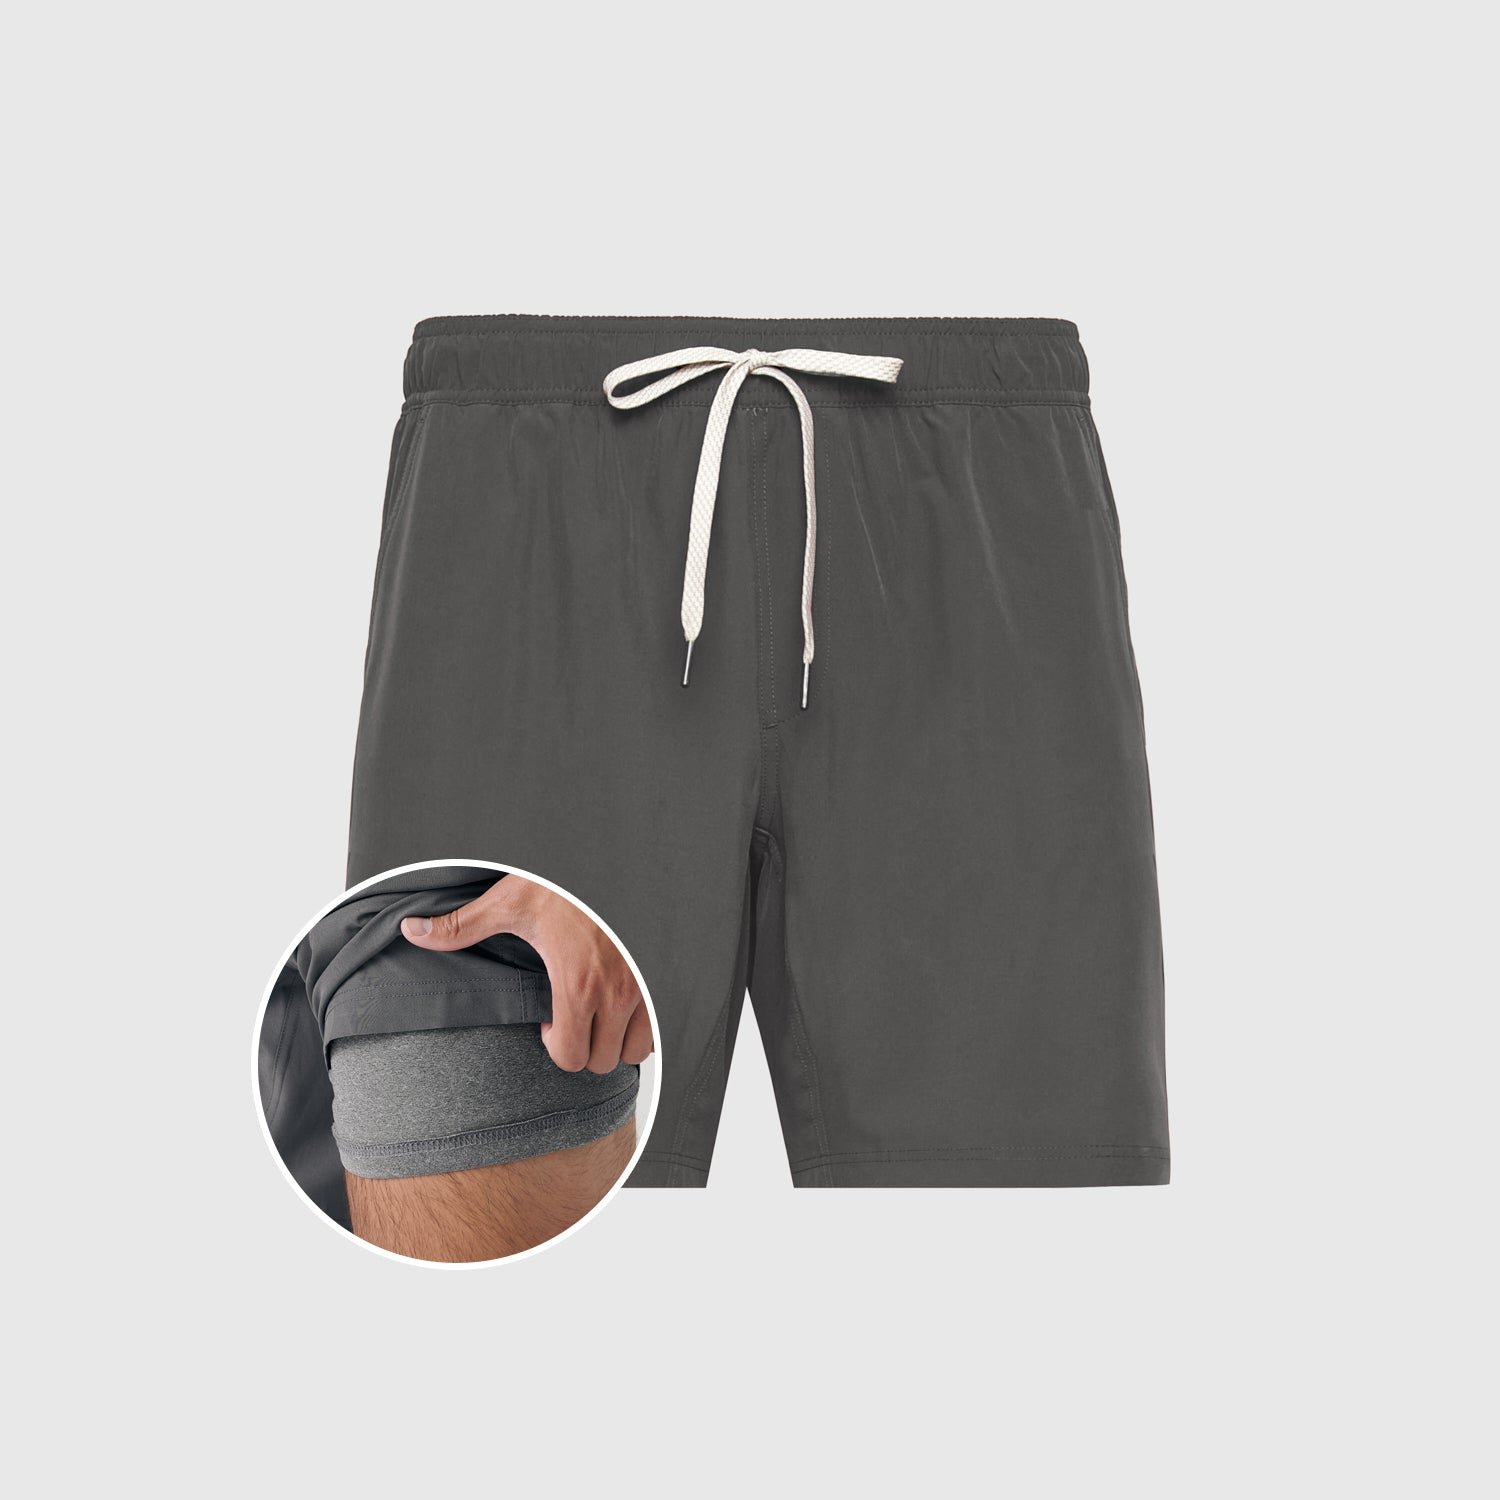 Carbon Active Quick Dry Short with Liner